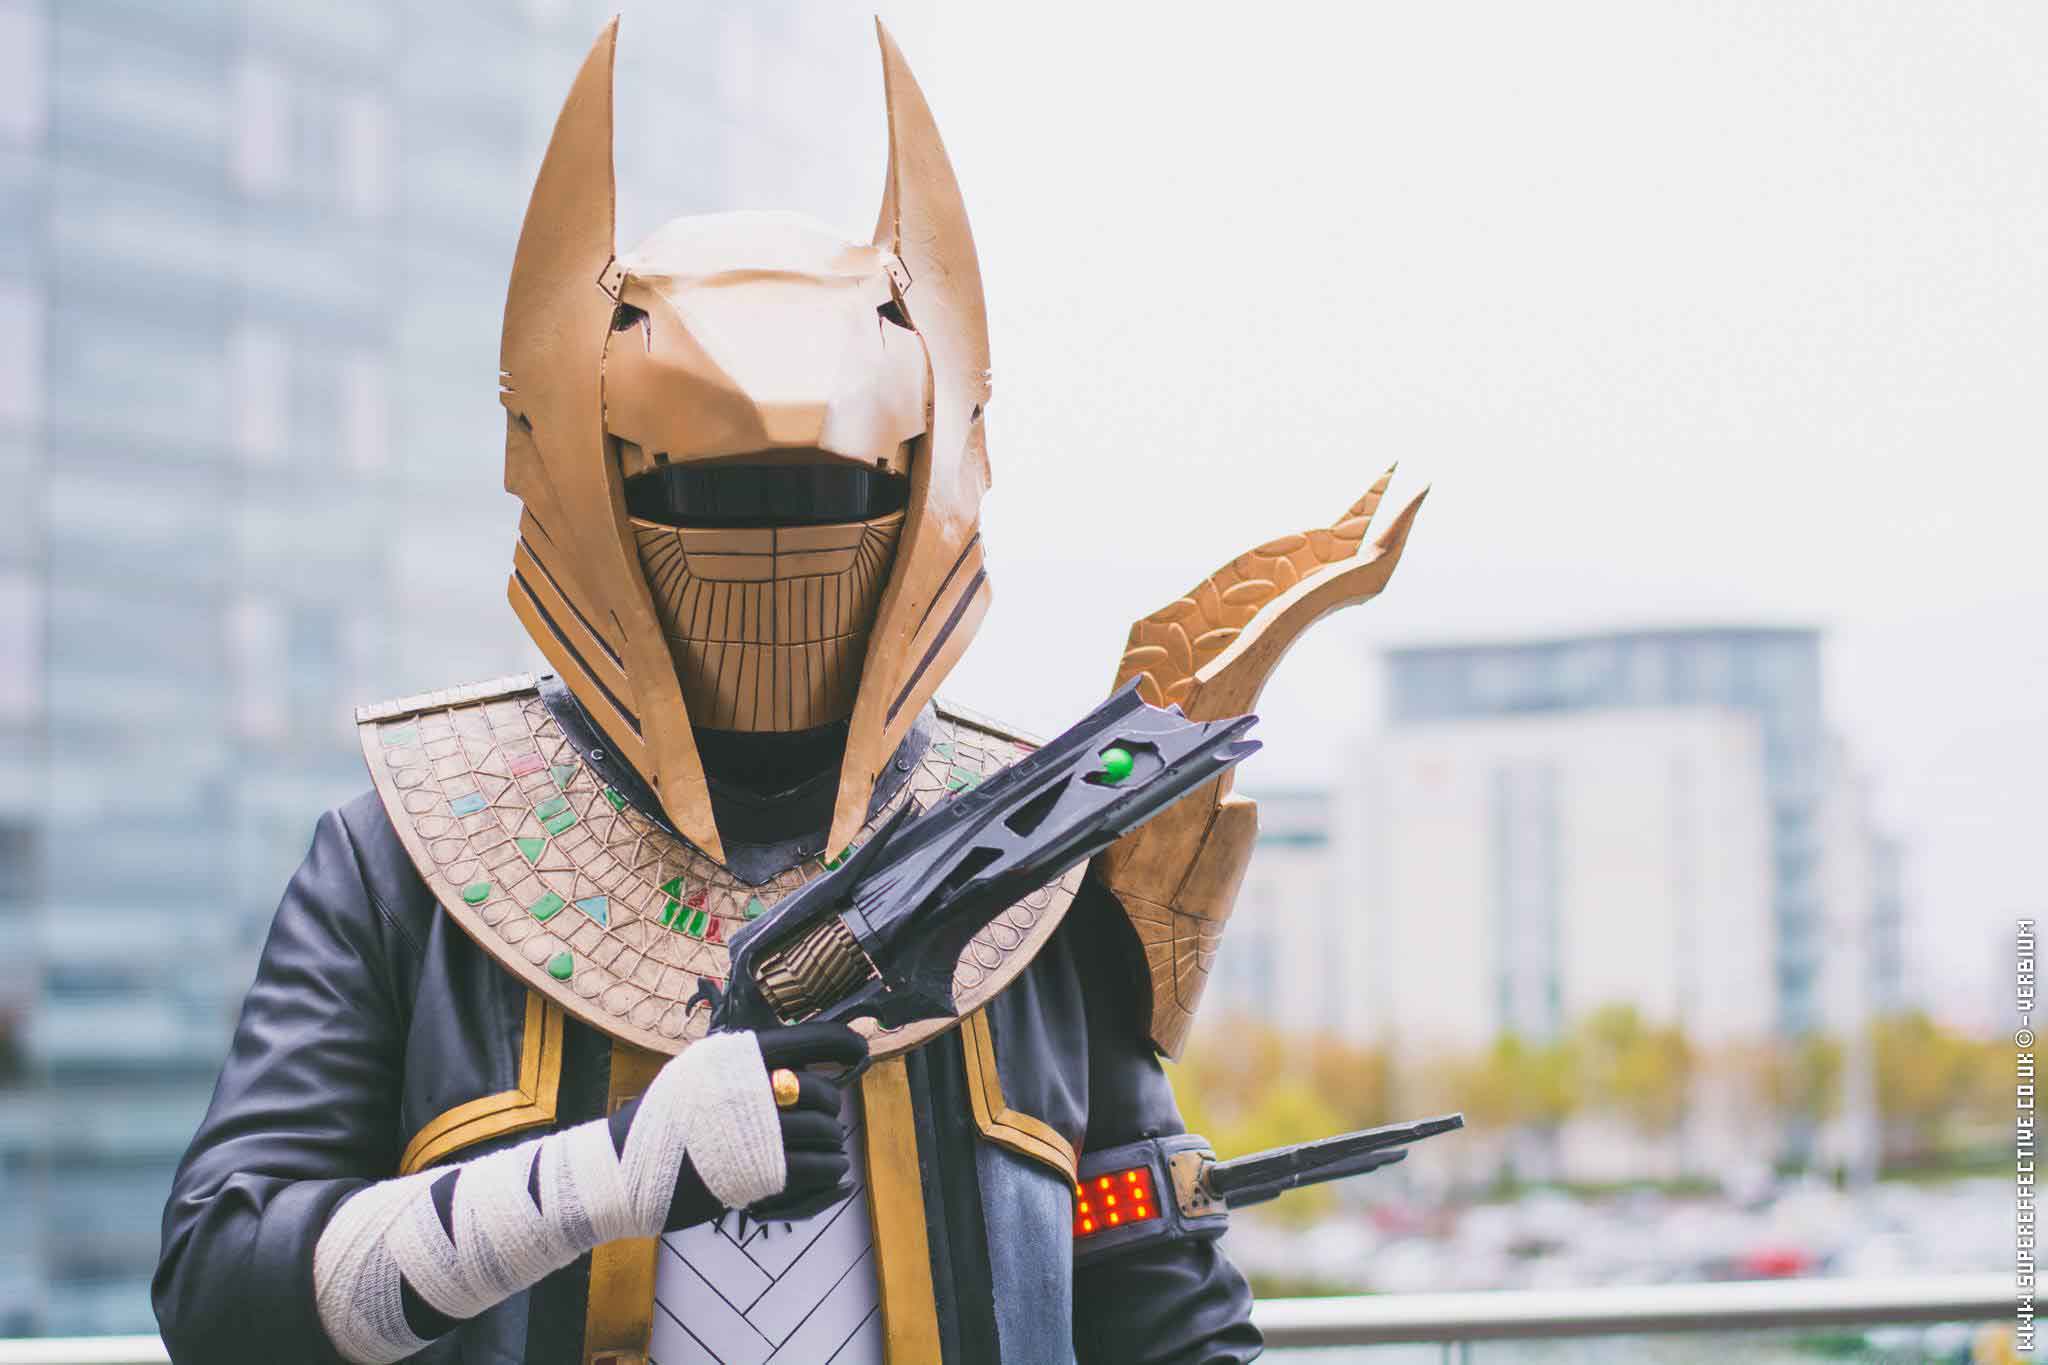 Thorn from Destiny